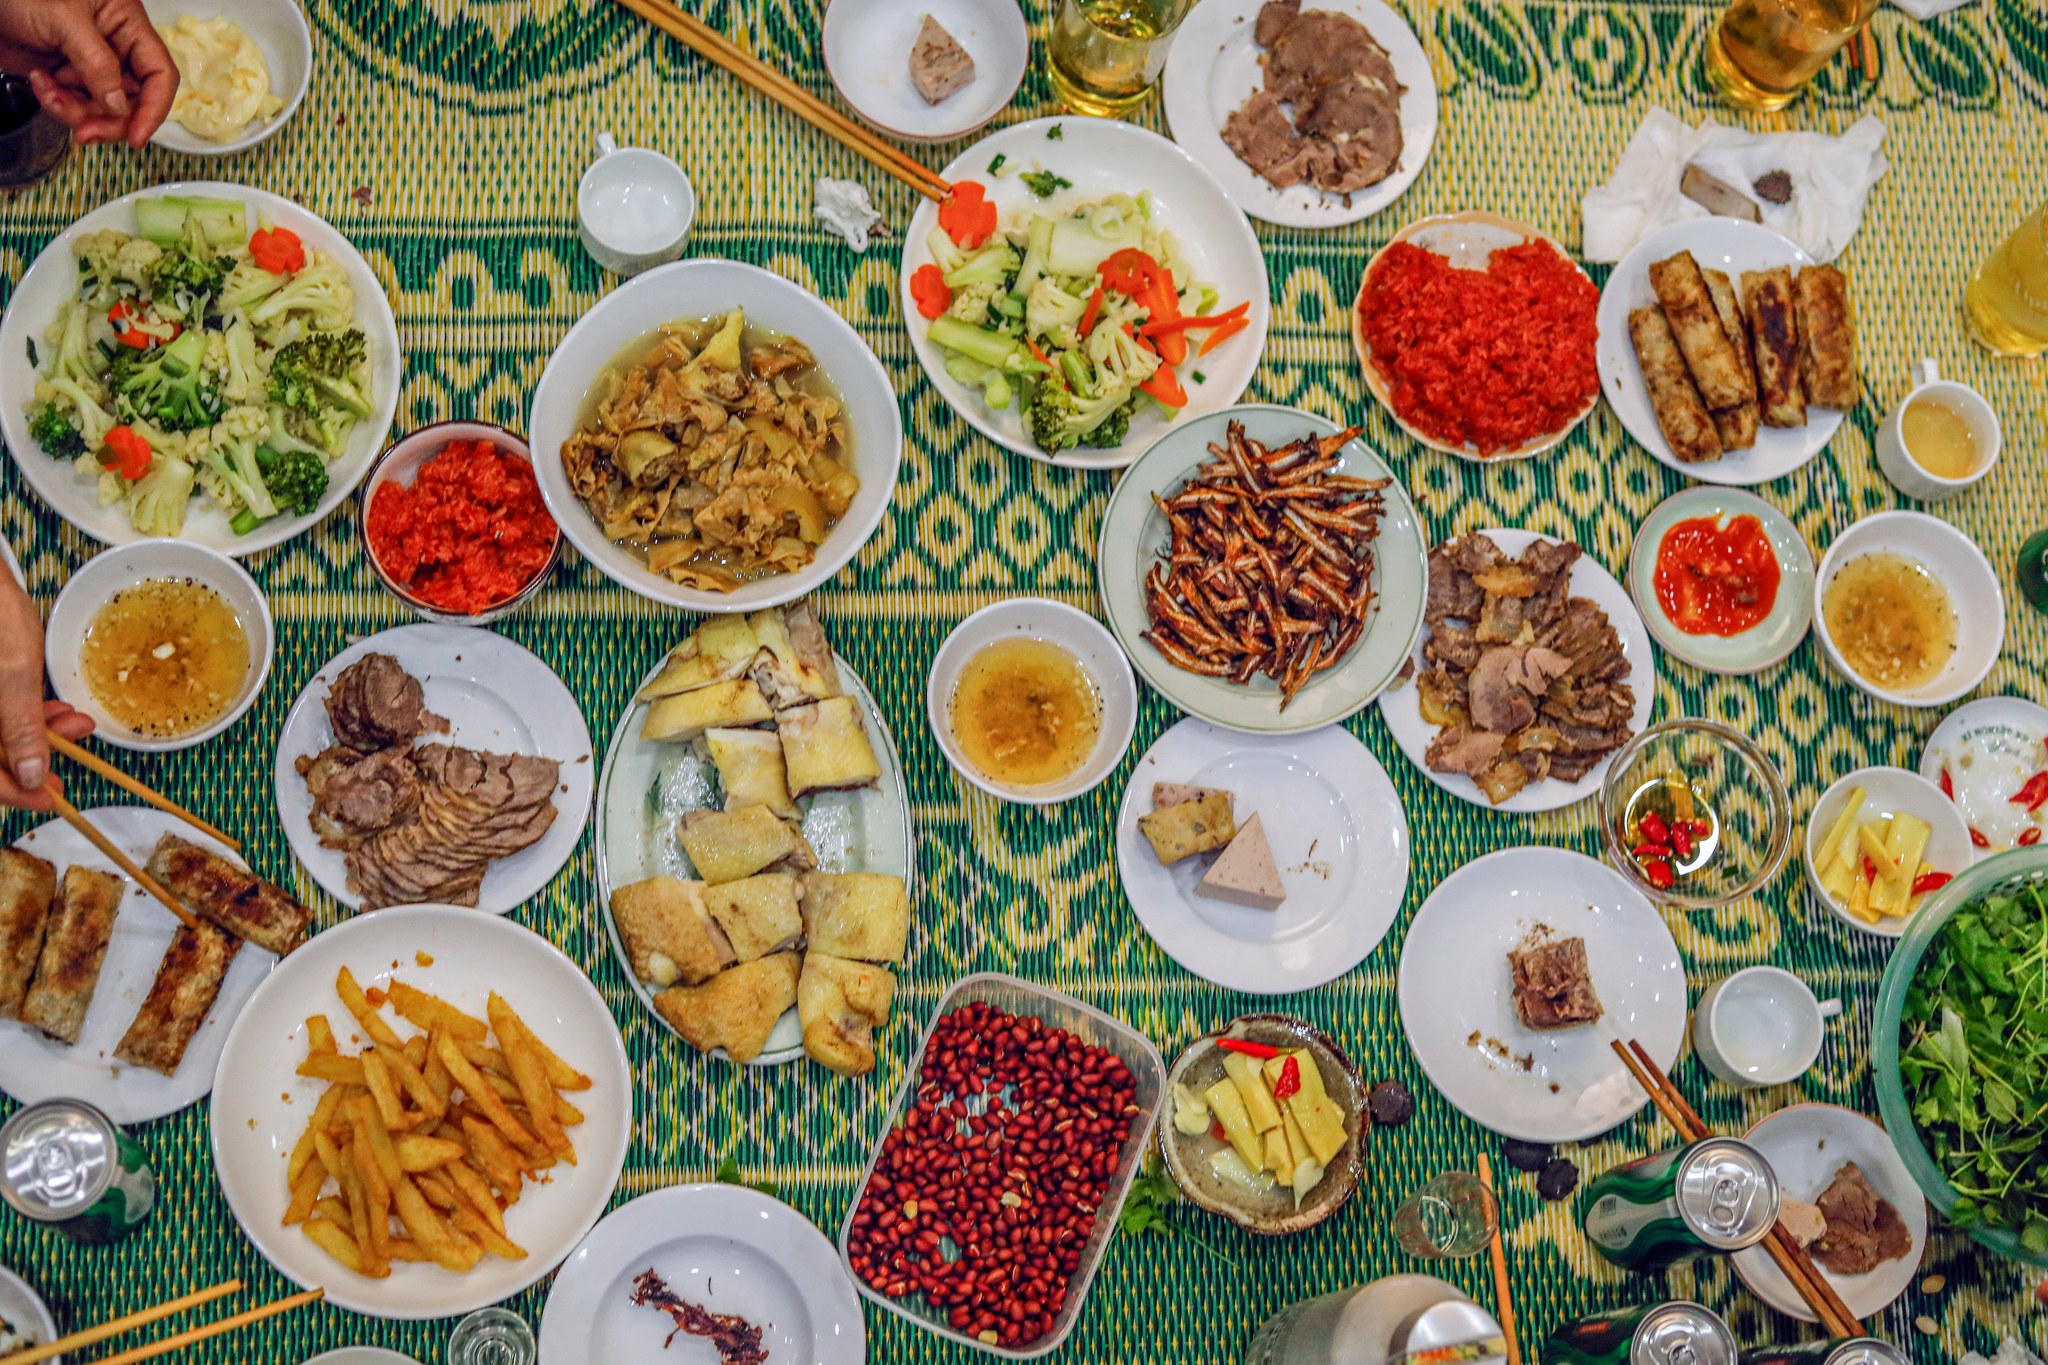 A Tet meal at a family in Hanoi. Photo: Marcus Lacey